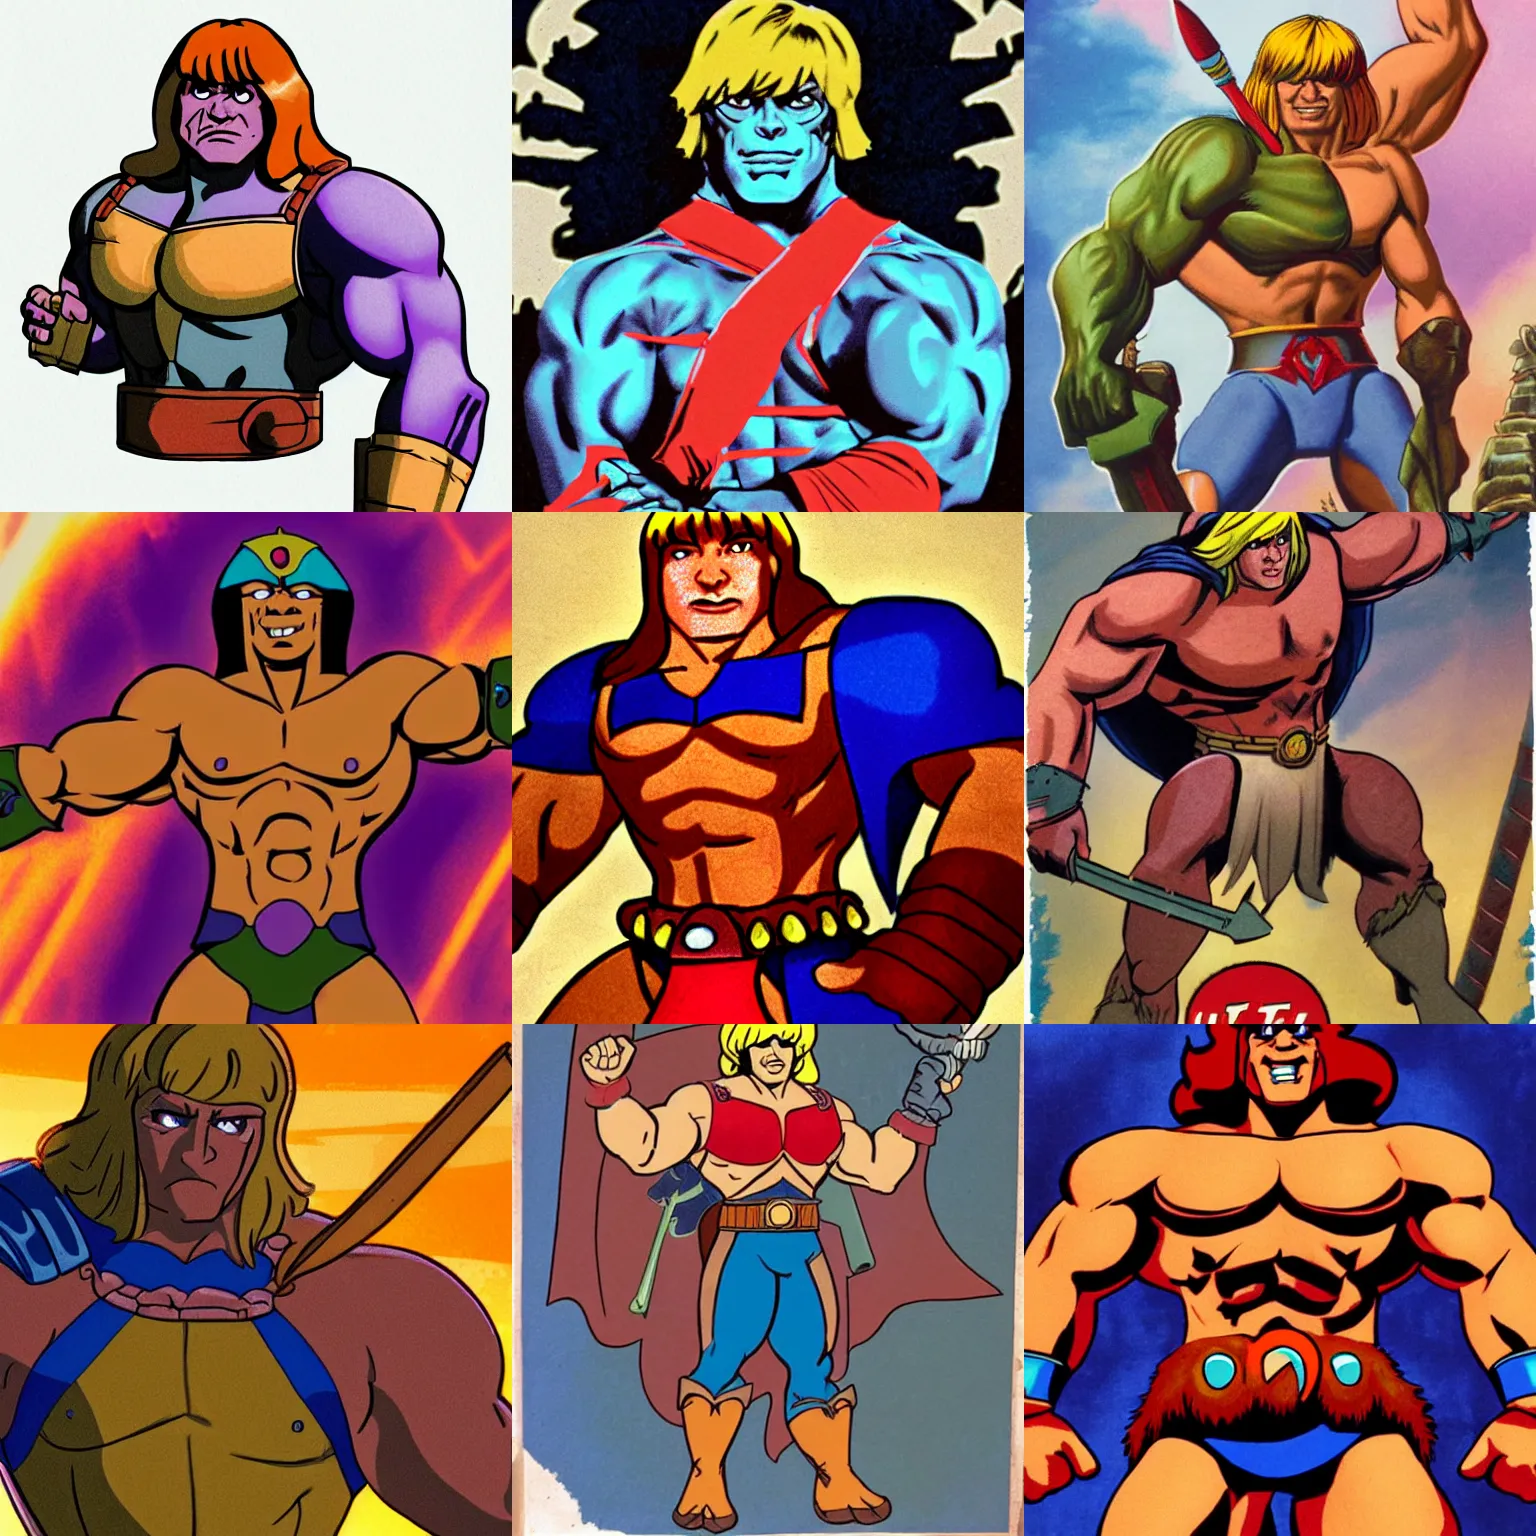 Prompt: image of he-man